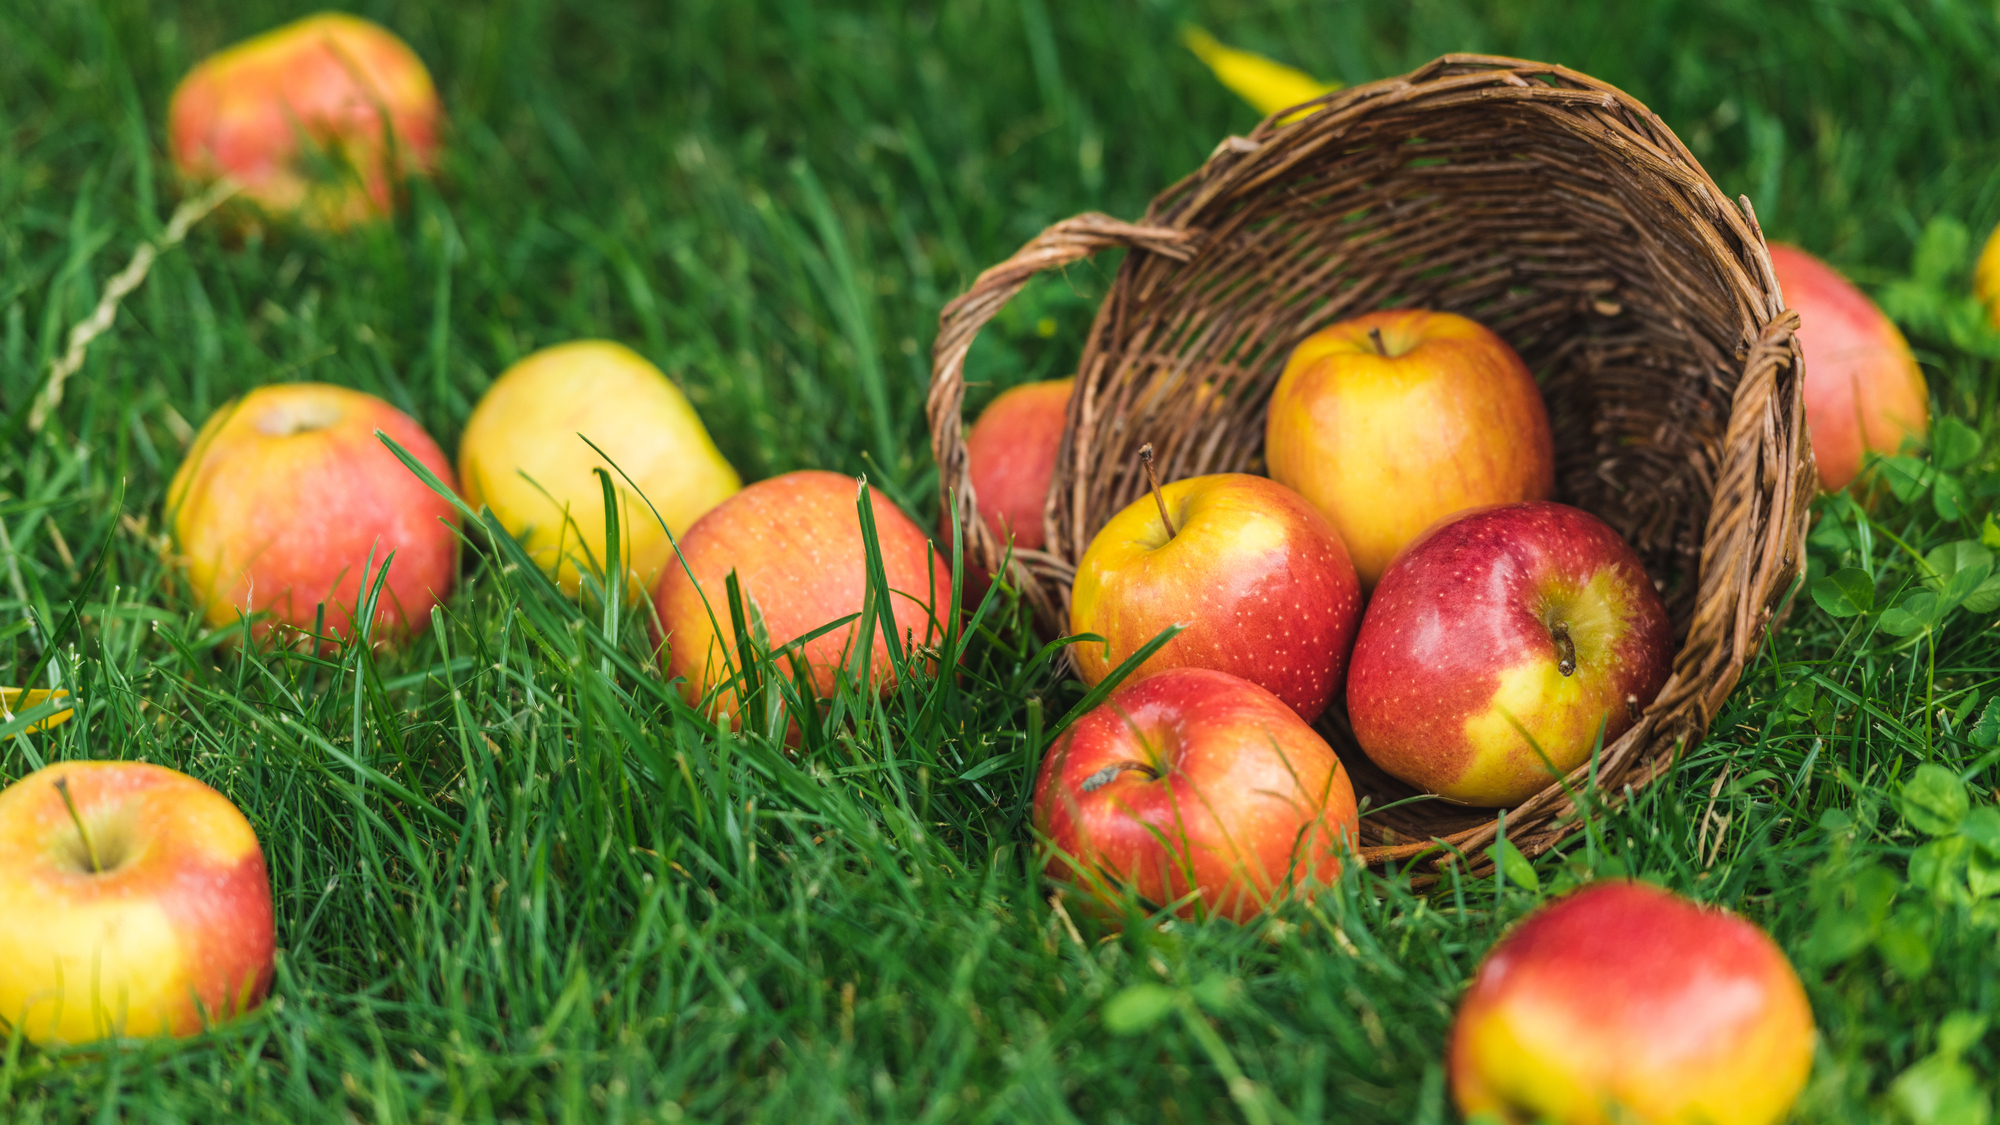 Wicker basket with apples spilled on grass